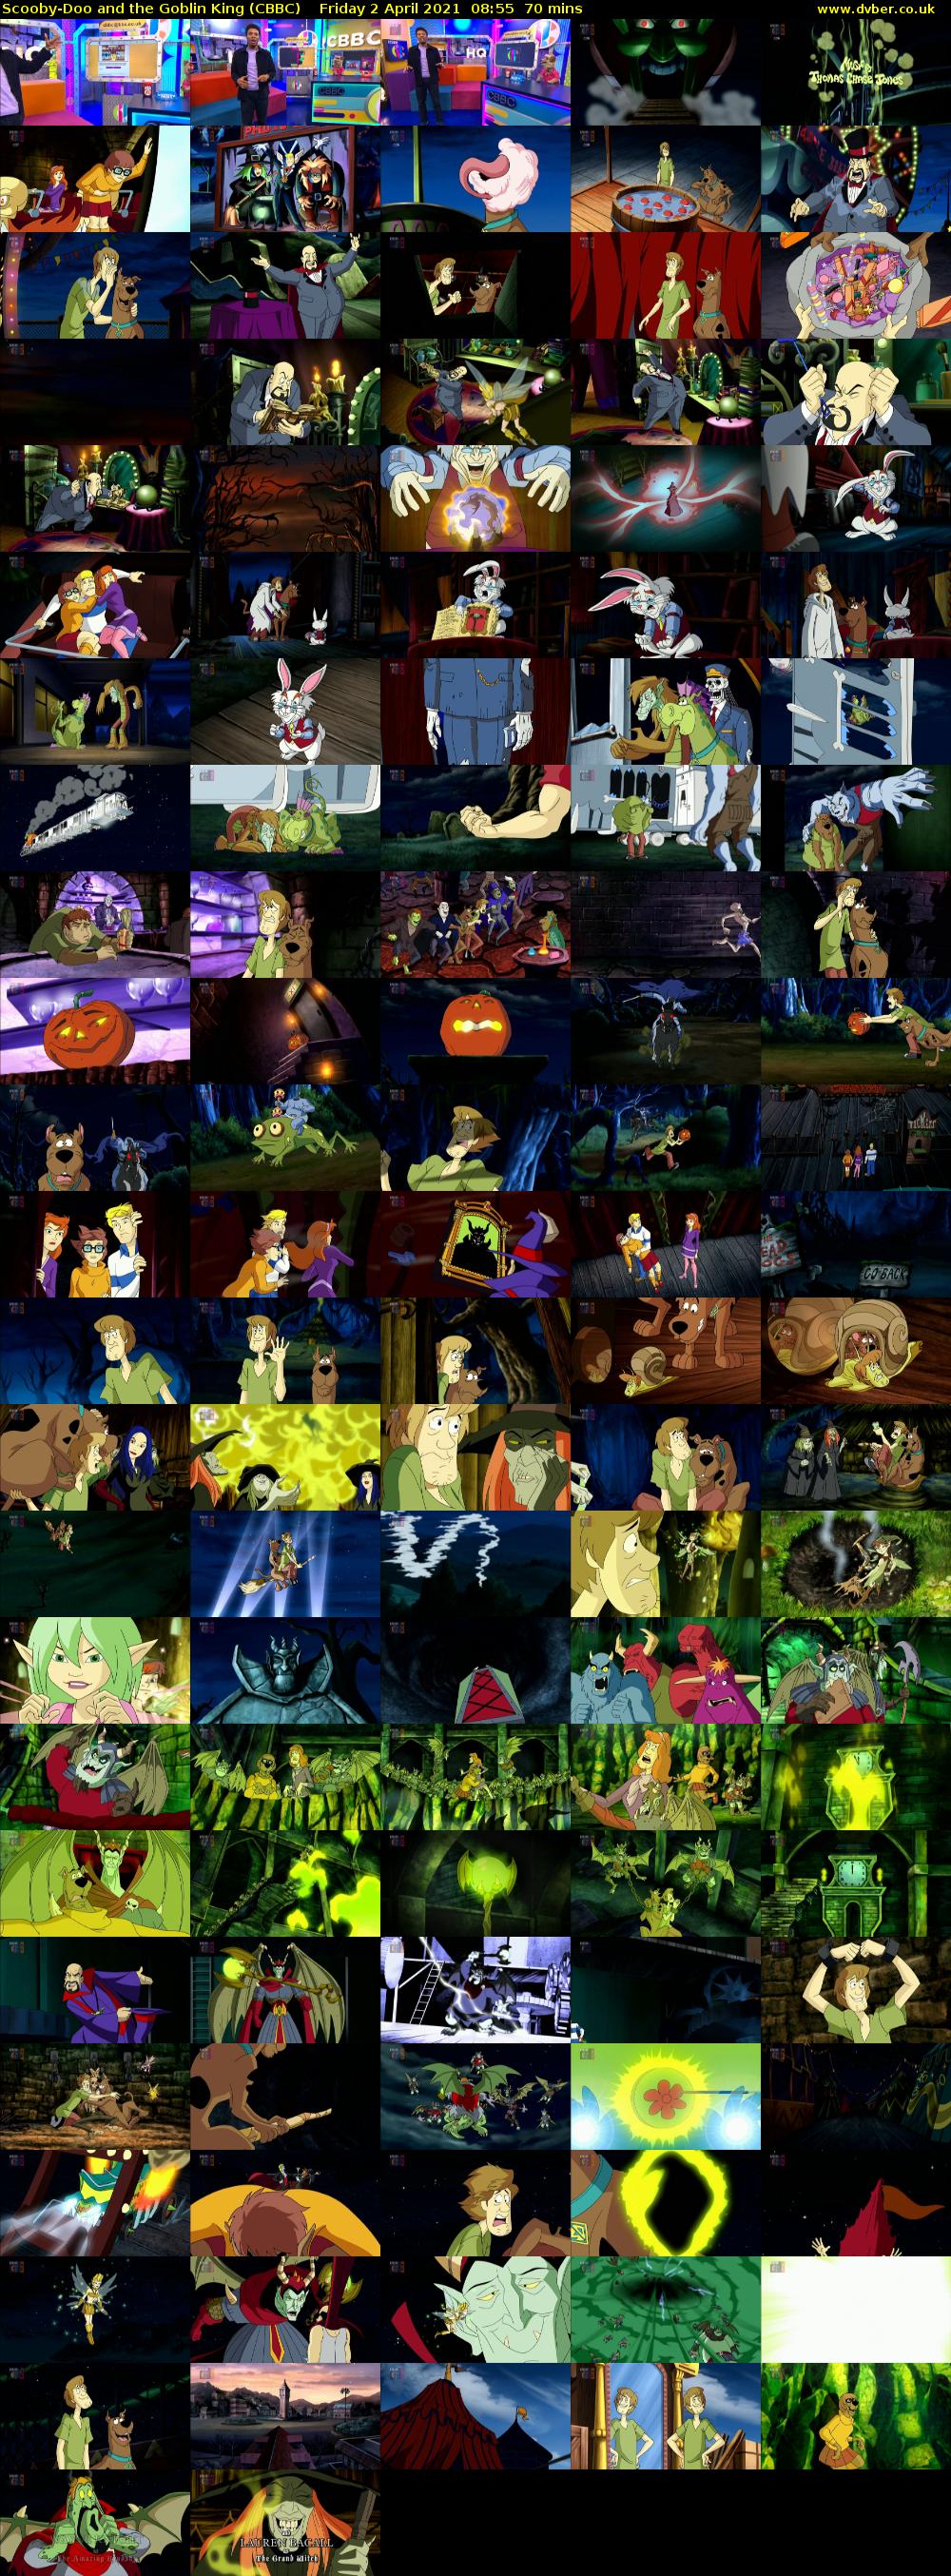 Scooby-Doo and the Goblin King (CBBC) Friday 2 April 2021 08:55 - 10:05